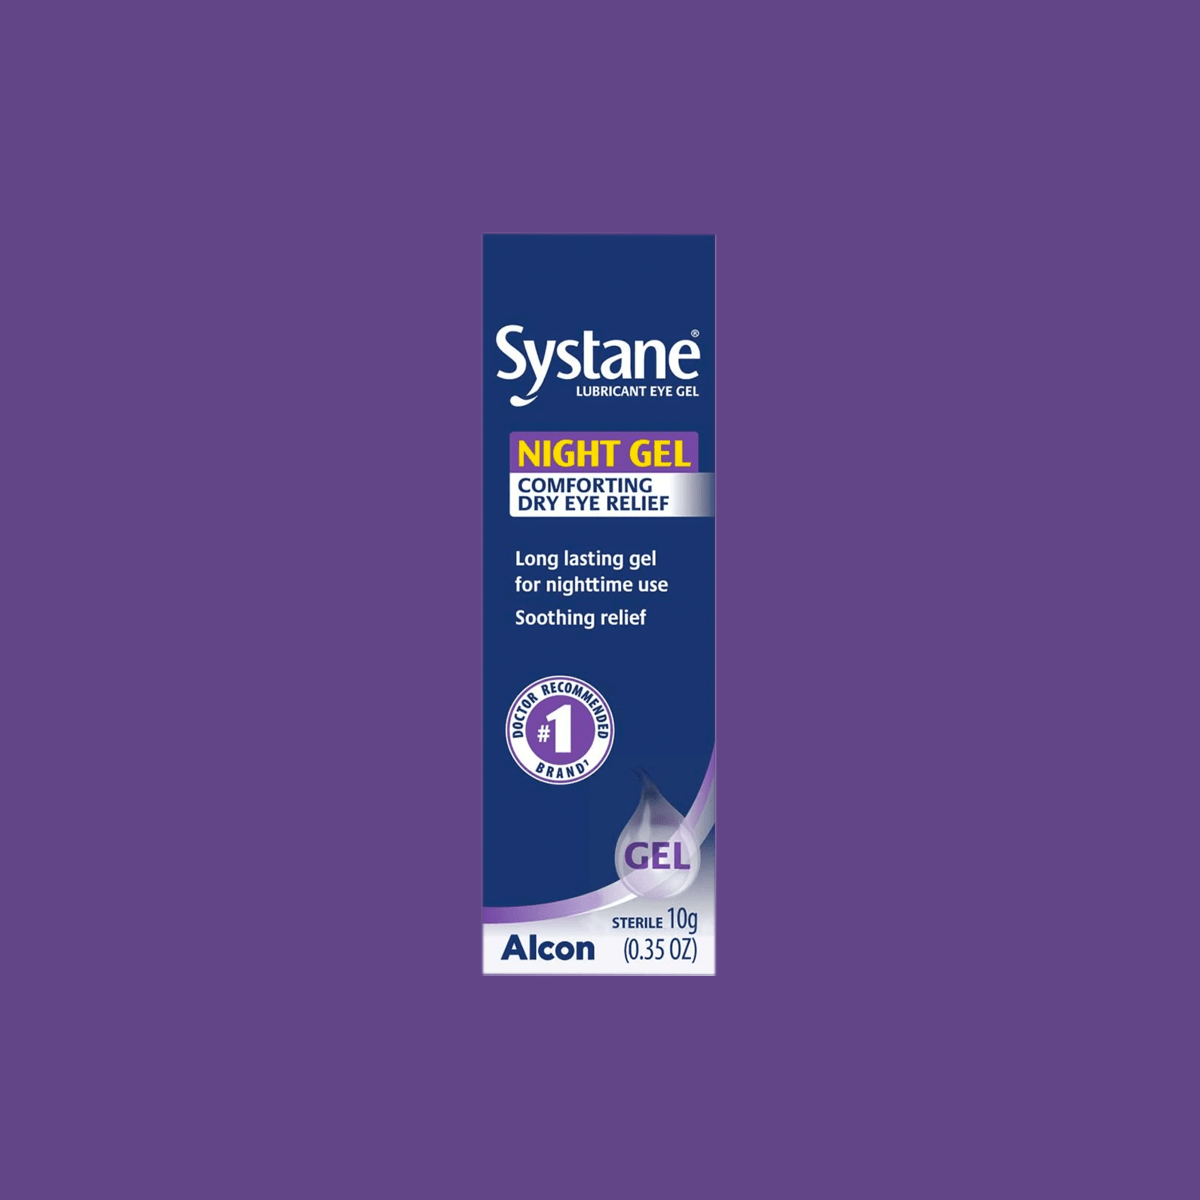 Systane Night Gel for Comforting Dry Eye Relief at Nighttime (10g / .35oz) - Dryeye Rescue